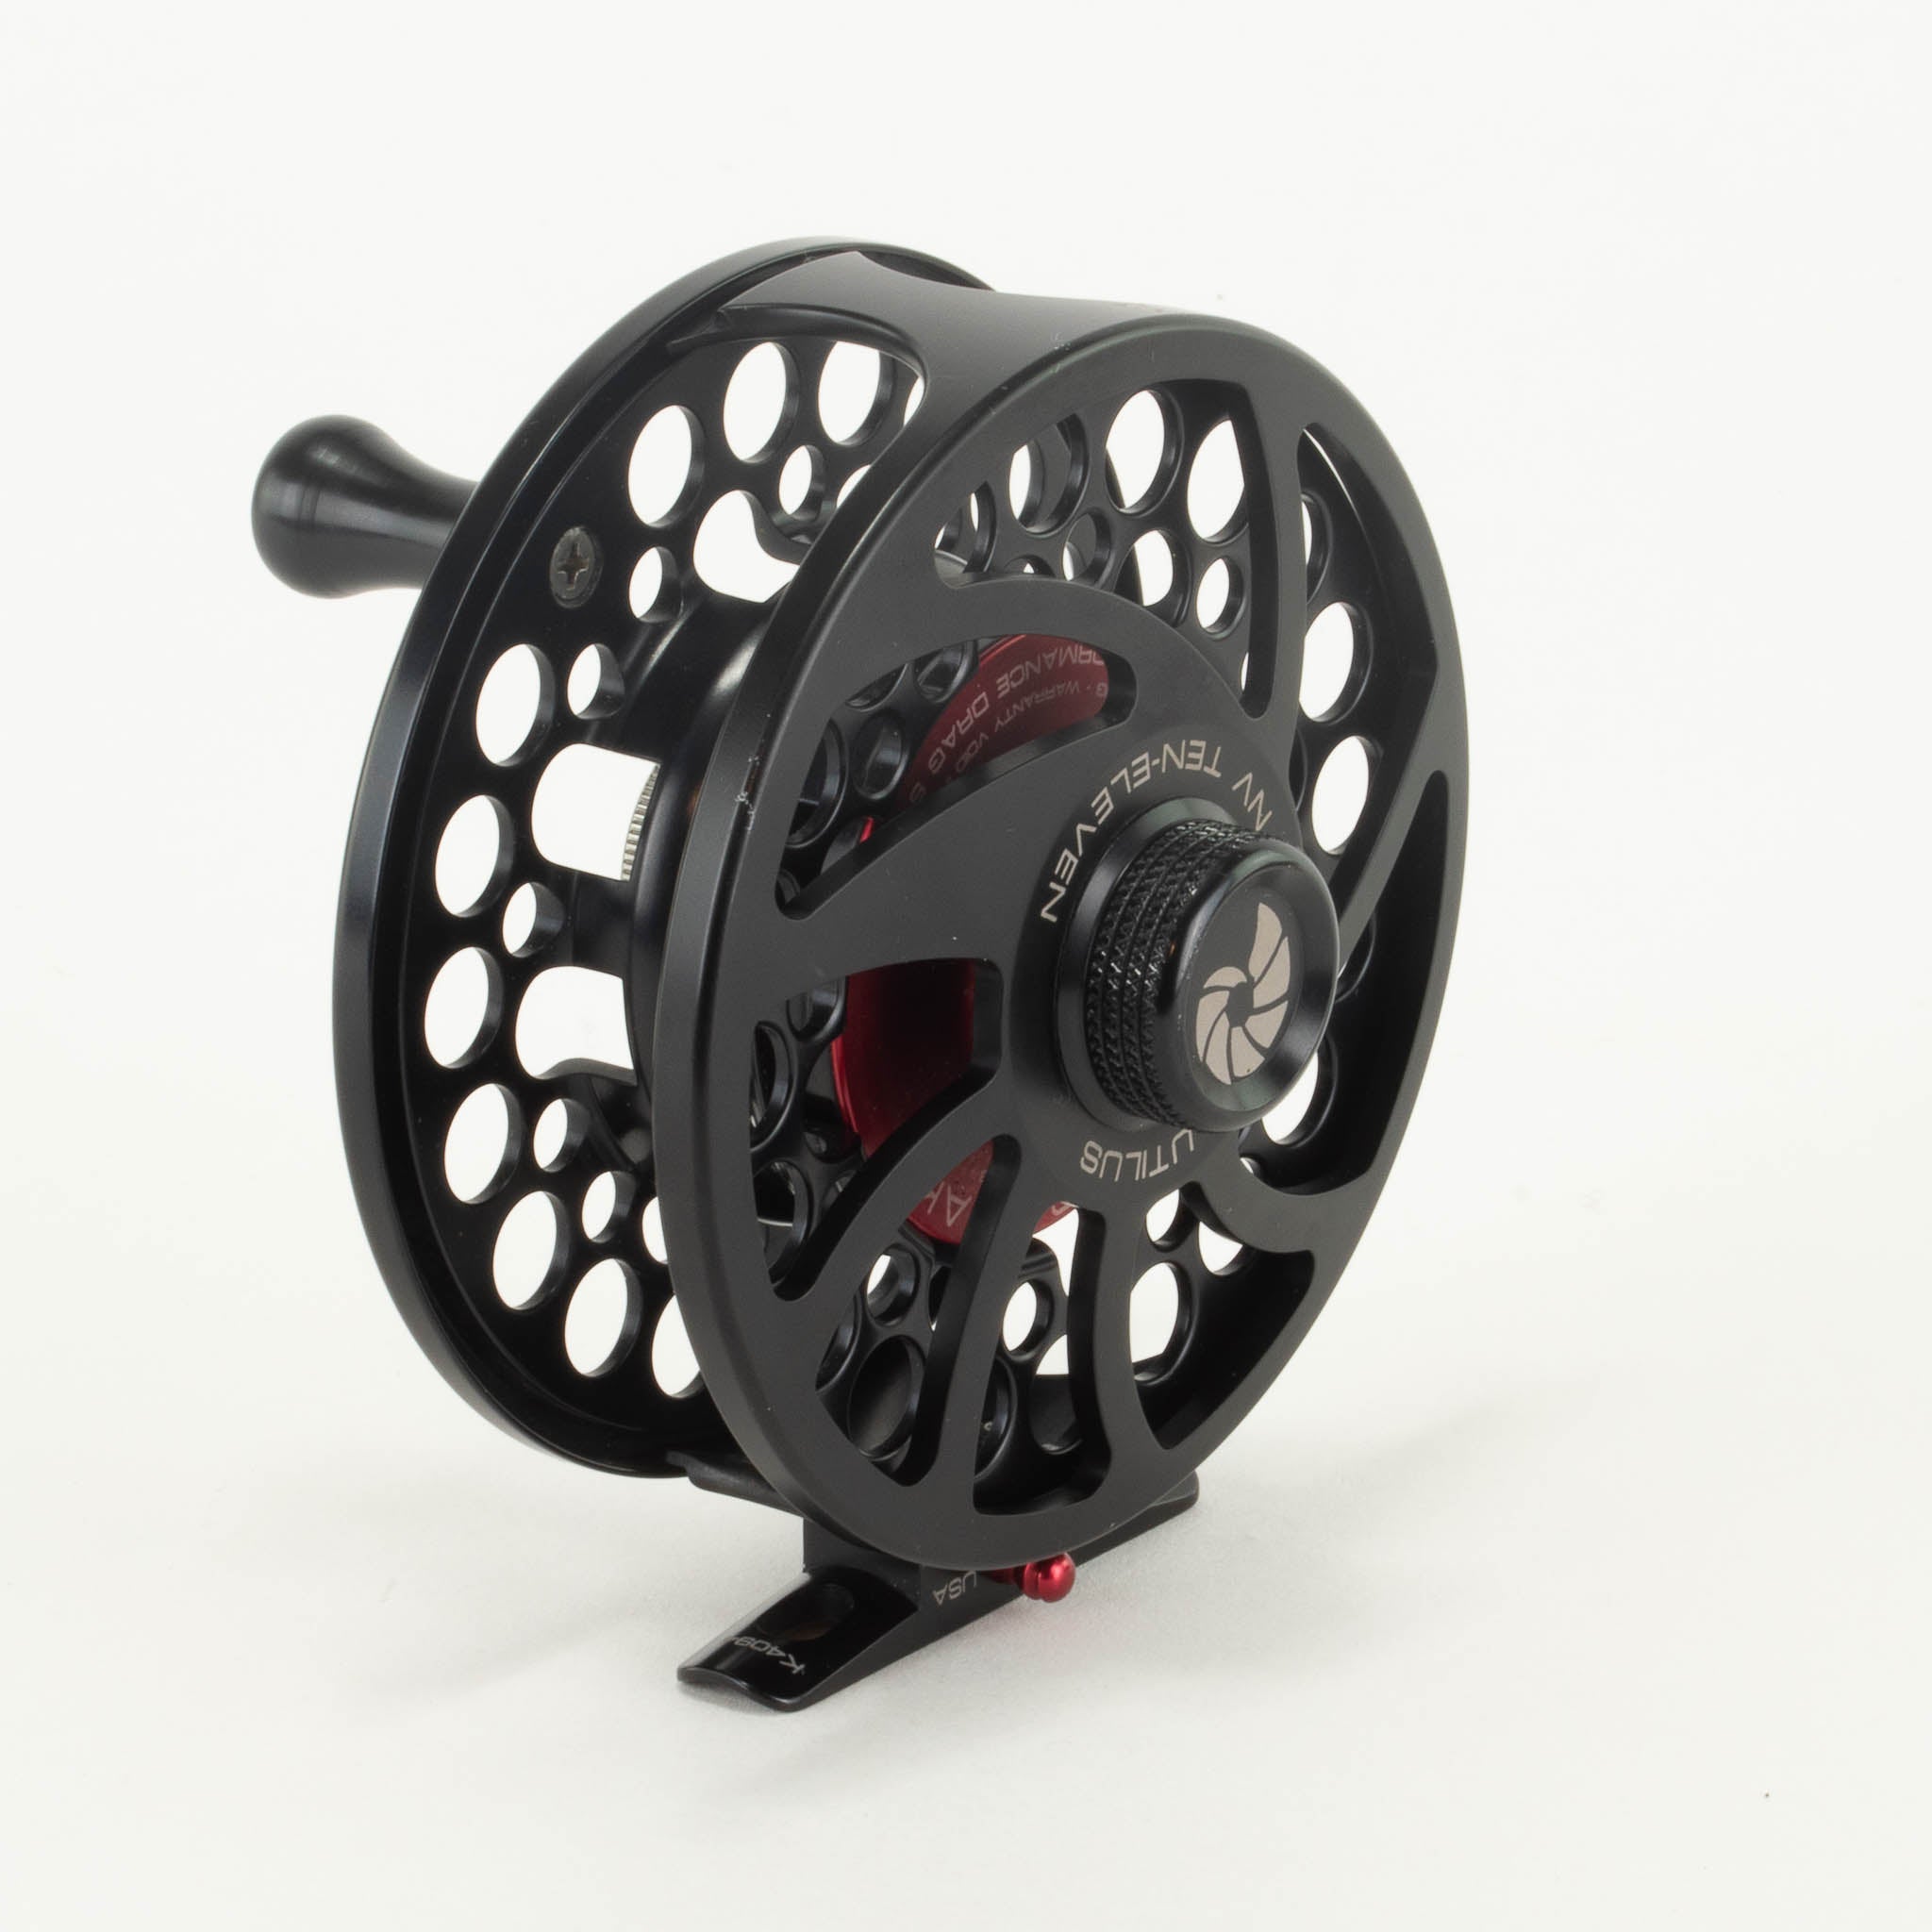 Nautilus 8-9 Line Weight Fishing Reels Fly Reel for sale